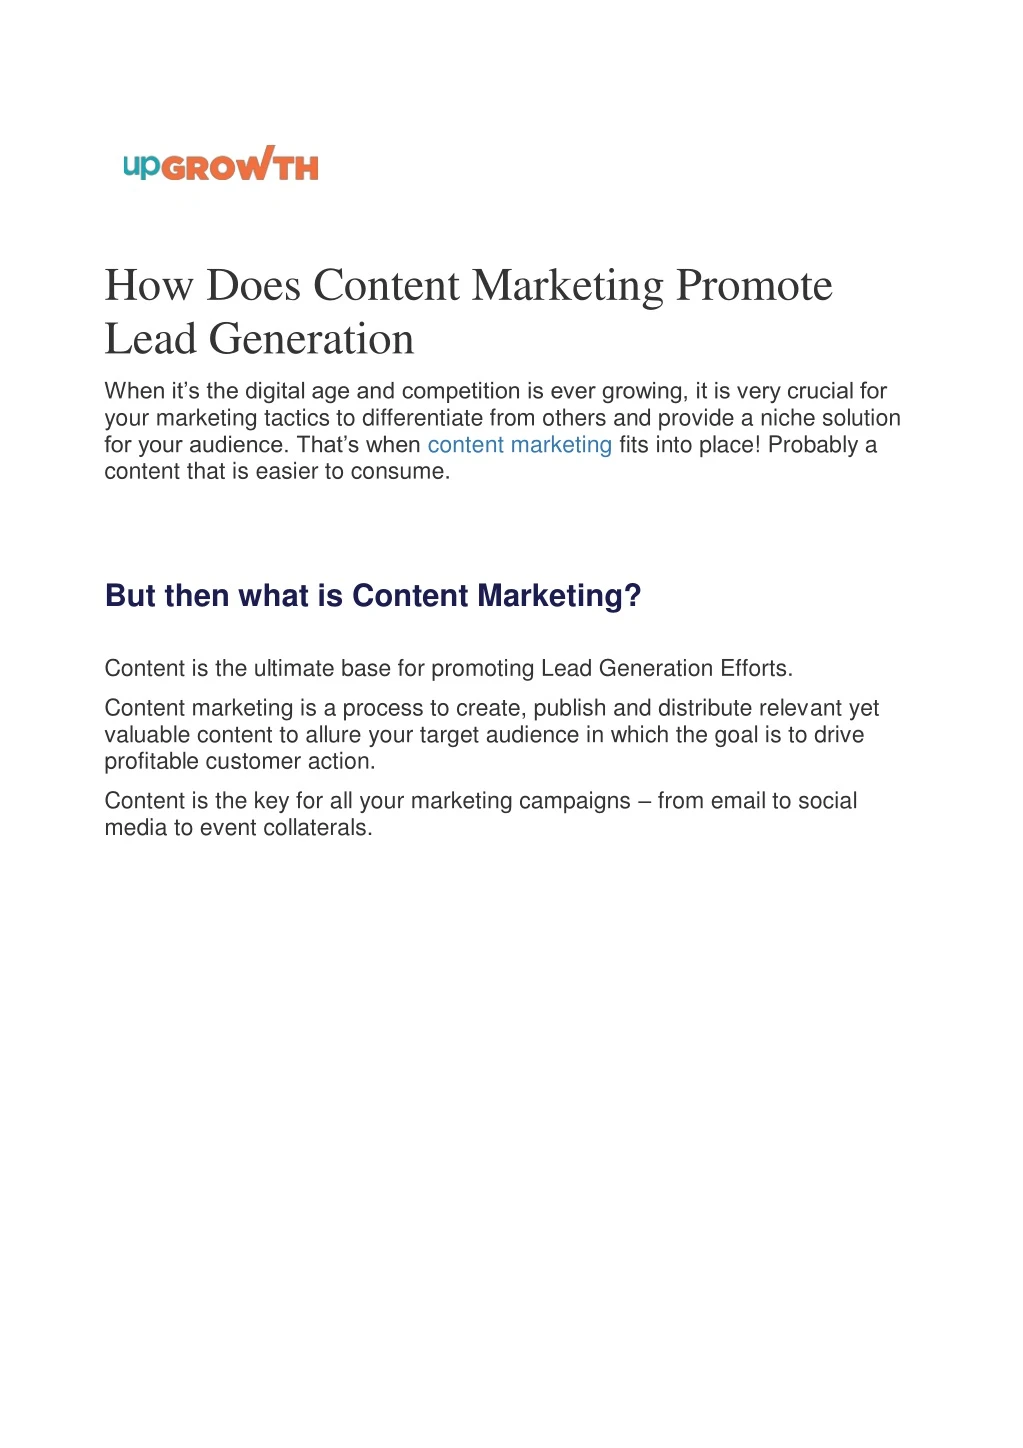 how does content marketing promote lead generation